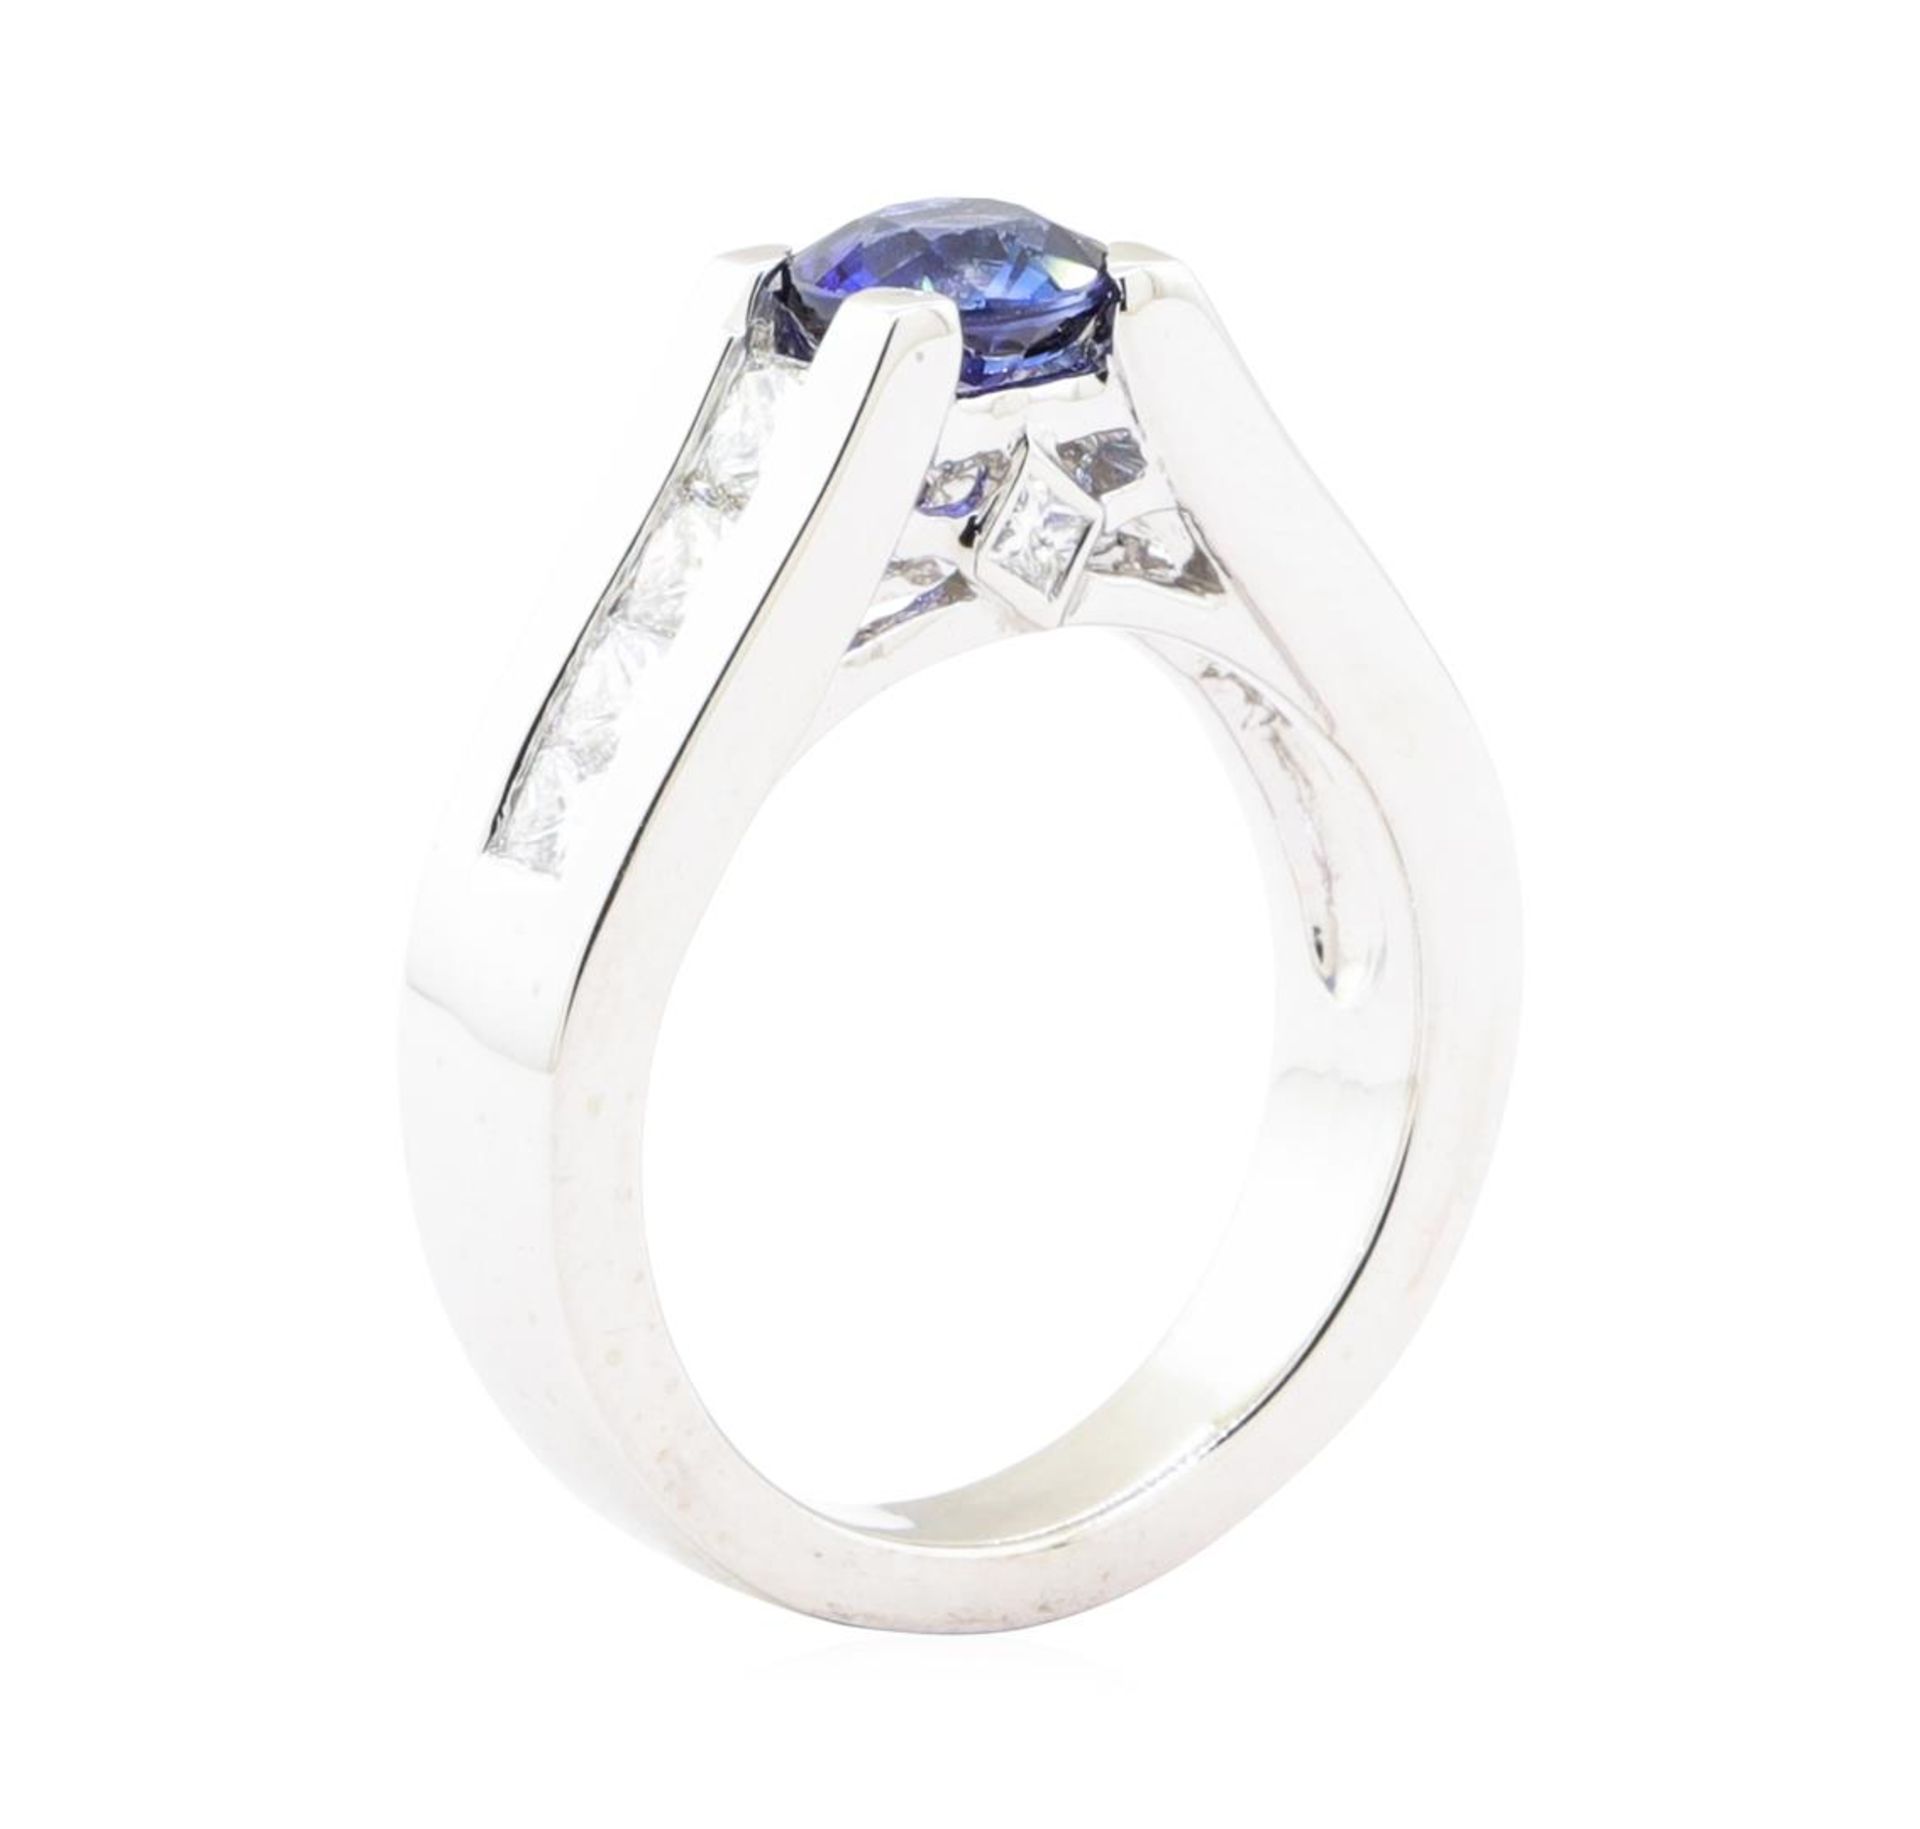 1.99 ctw Sapphire And Diamond Ring - 14KT White Gold - Image 4 of 5